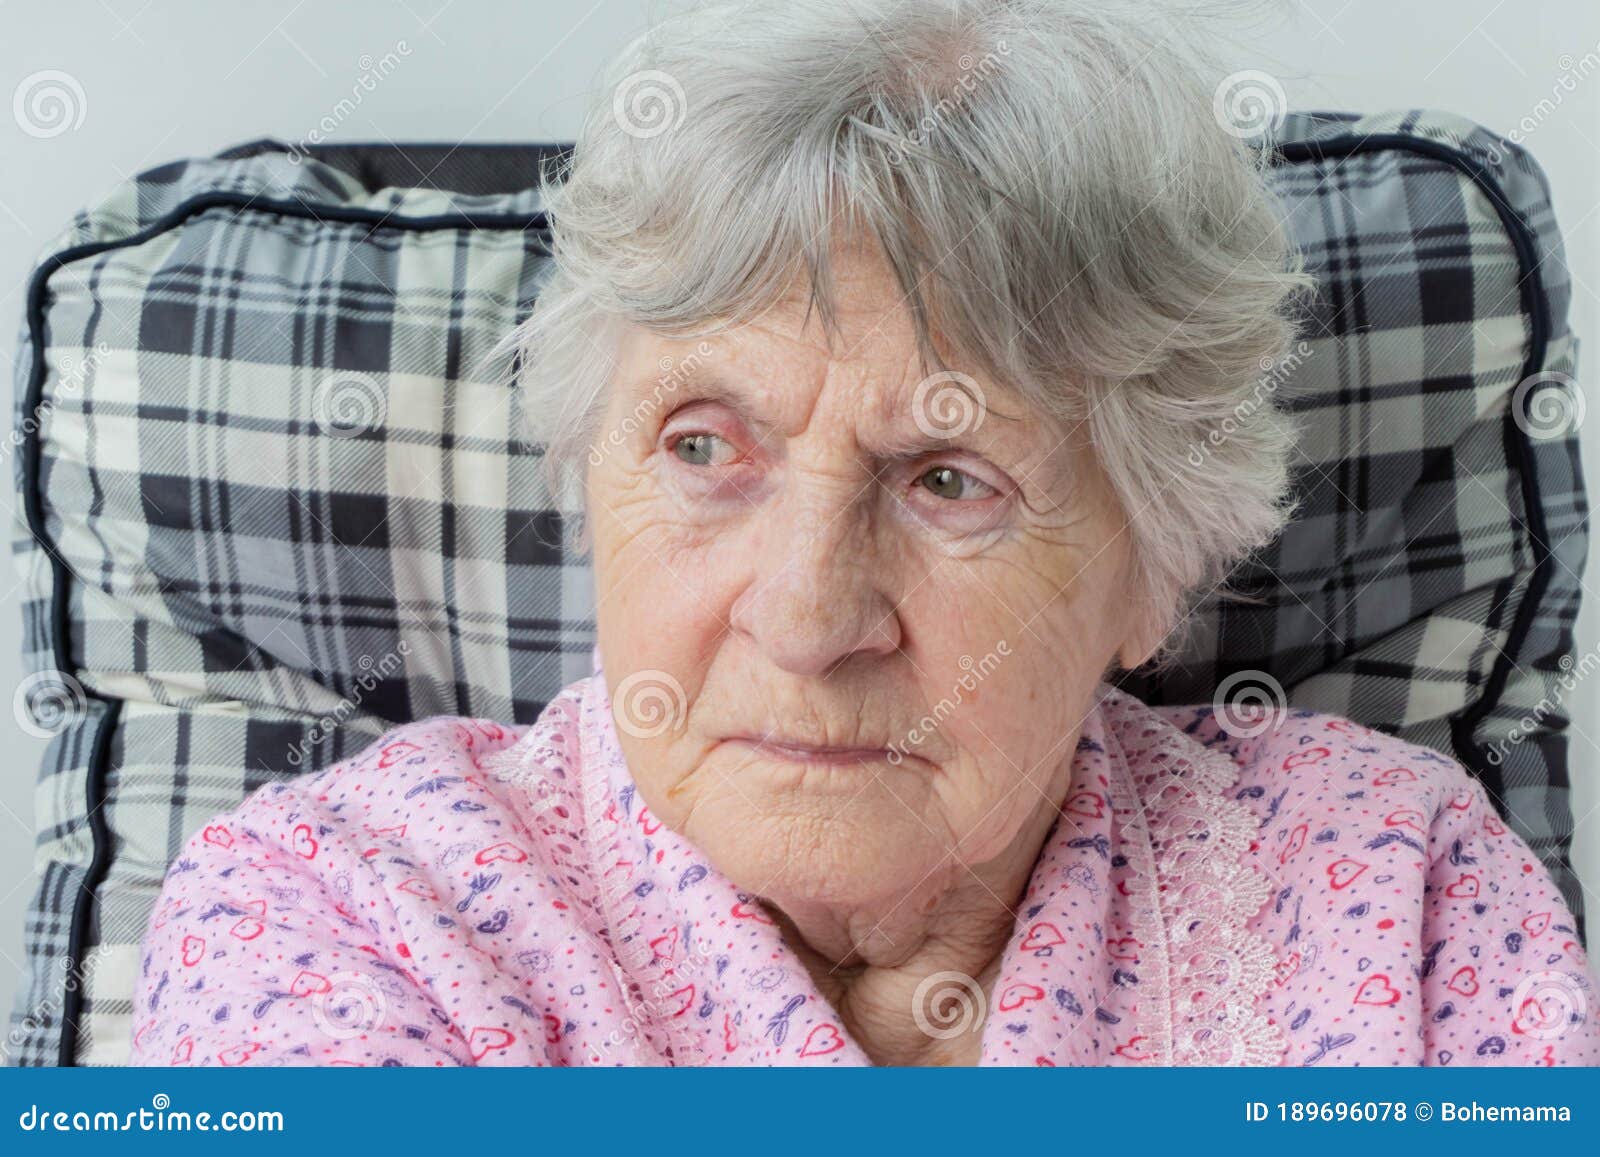 Portrait Of Old Senior Woman With Gray Hair Stock Photo Image Of Lifestyle Mother